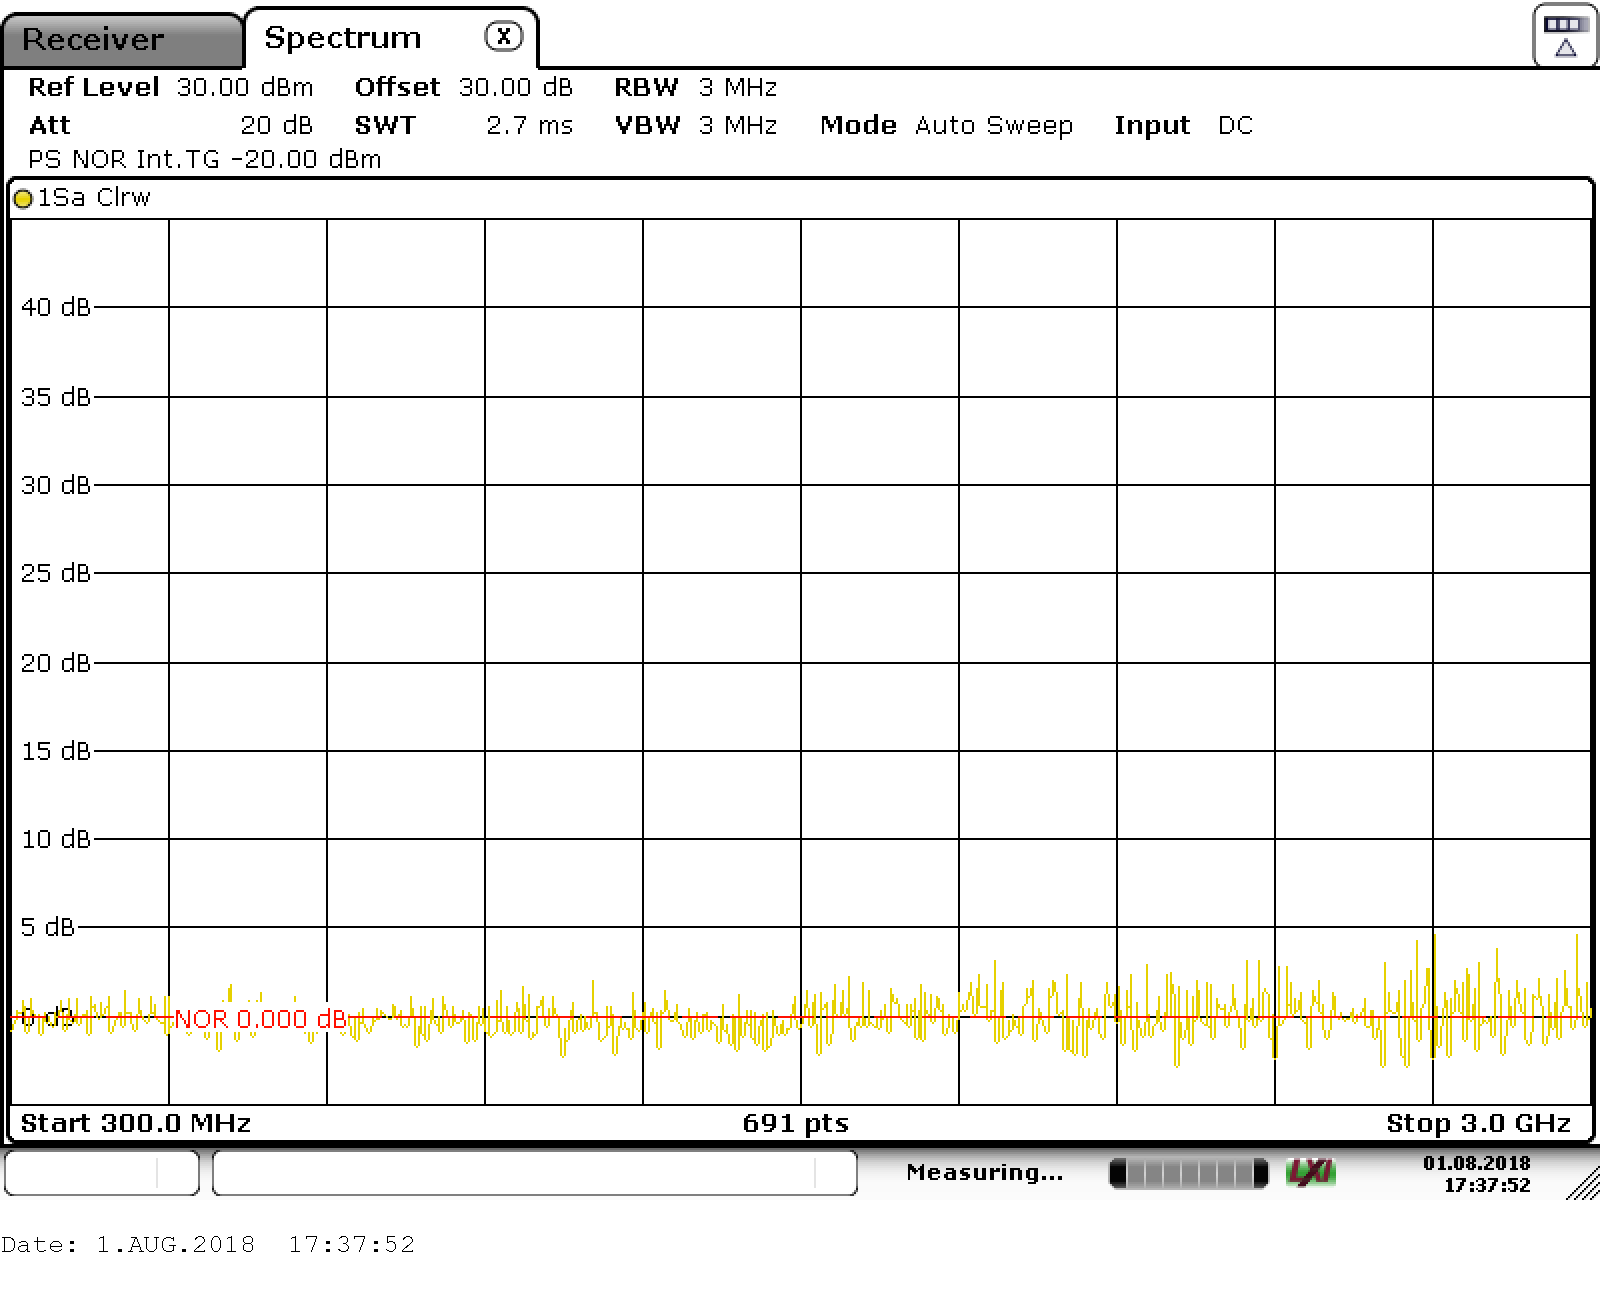 Frequency range 300MHz - 3GHz. Input -20dBm, normalized to 0dBm, hence coax cables and output attenuator are calibrated out of the measurment loop.